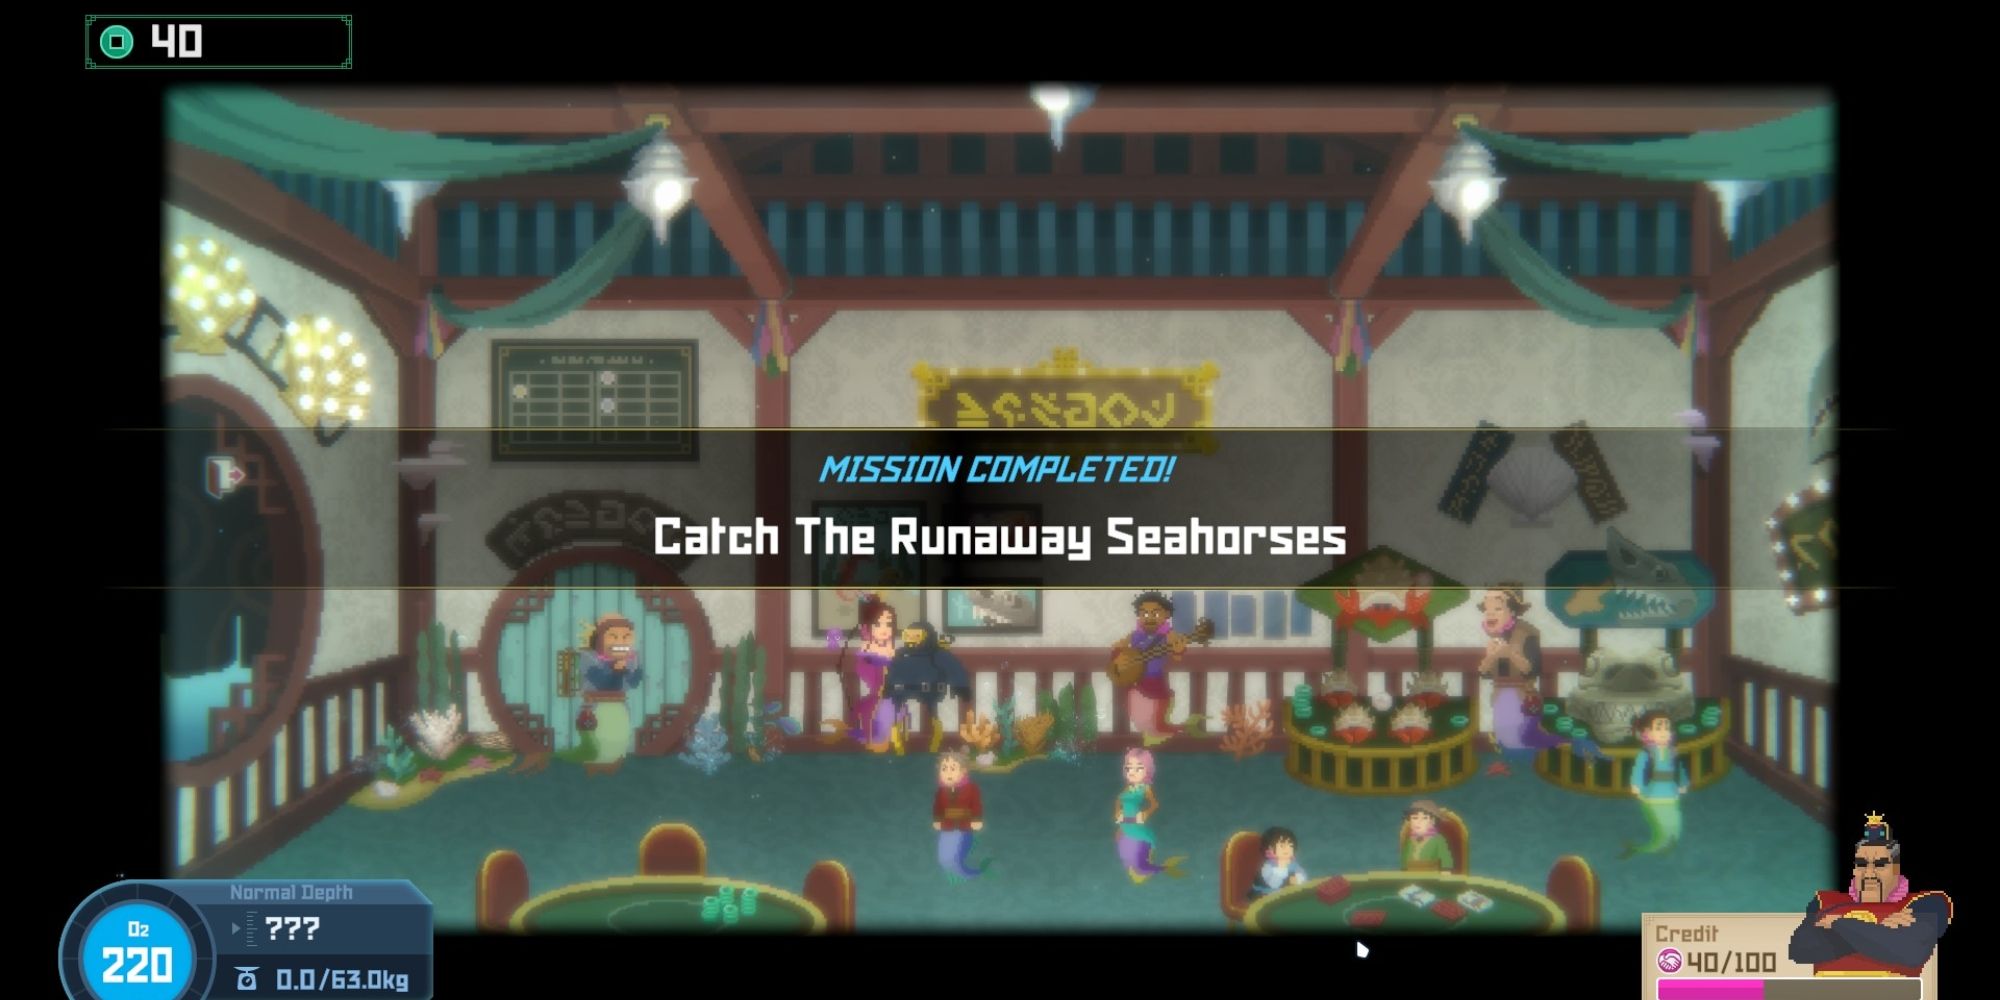 Completing Catch the Runaway Seahorses mission in dave the diver